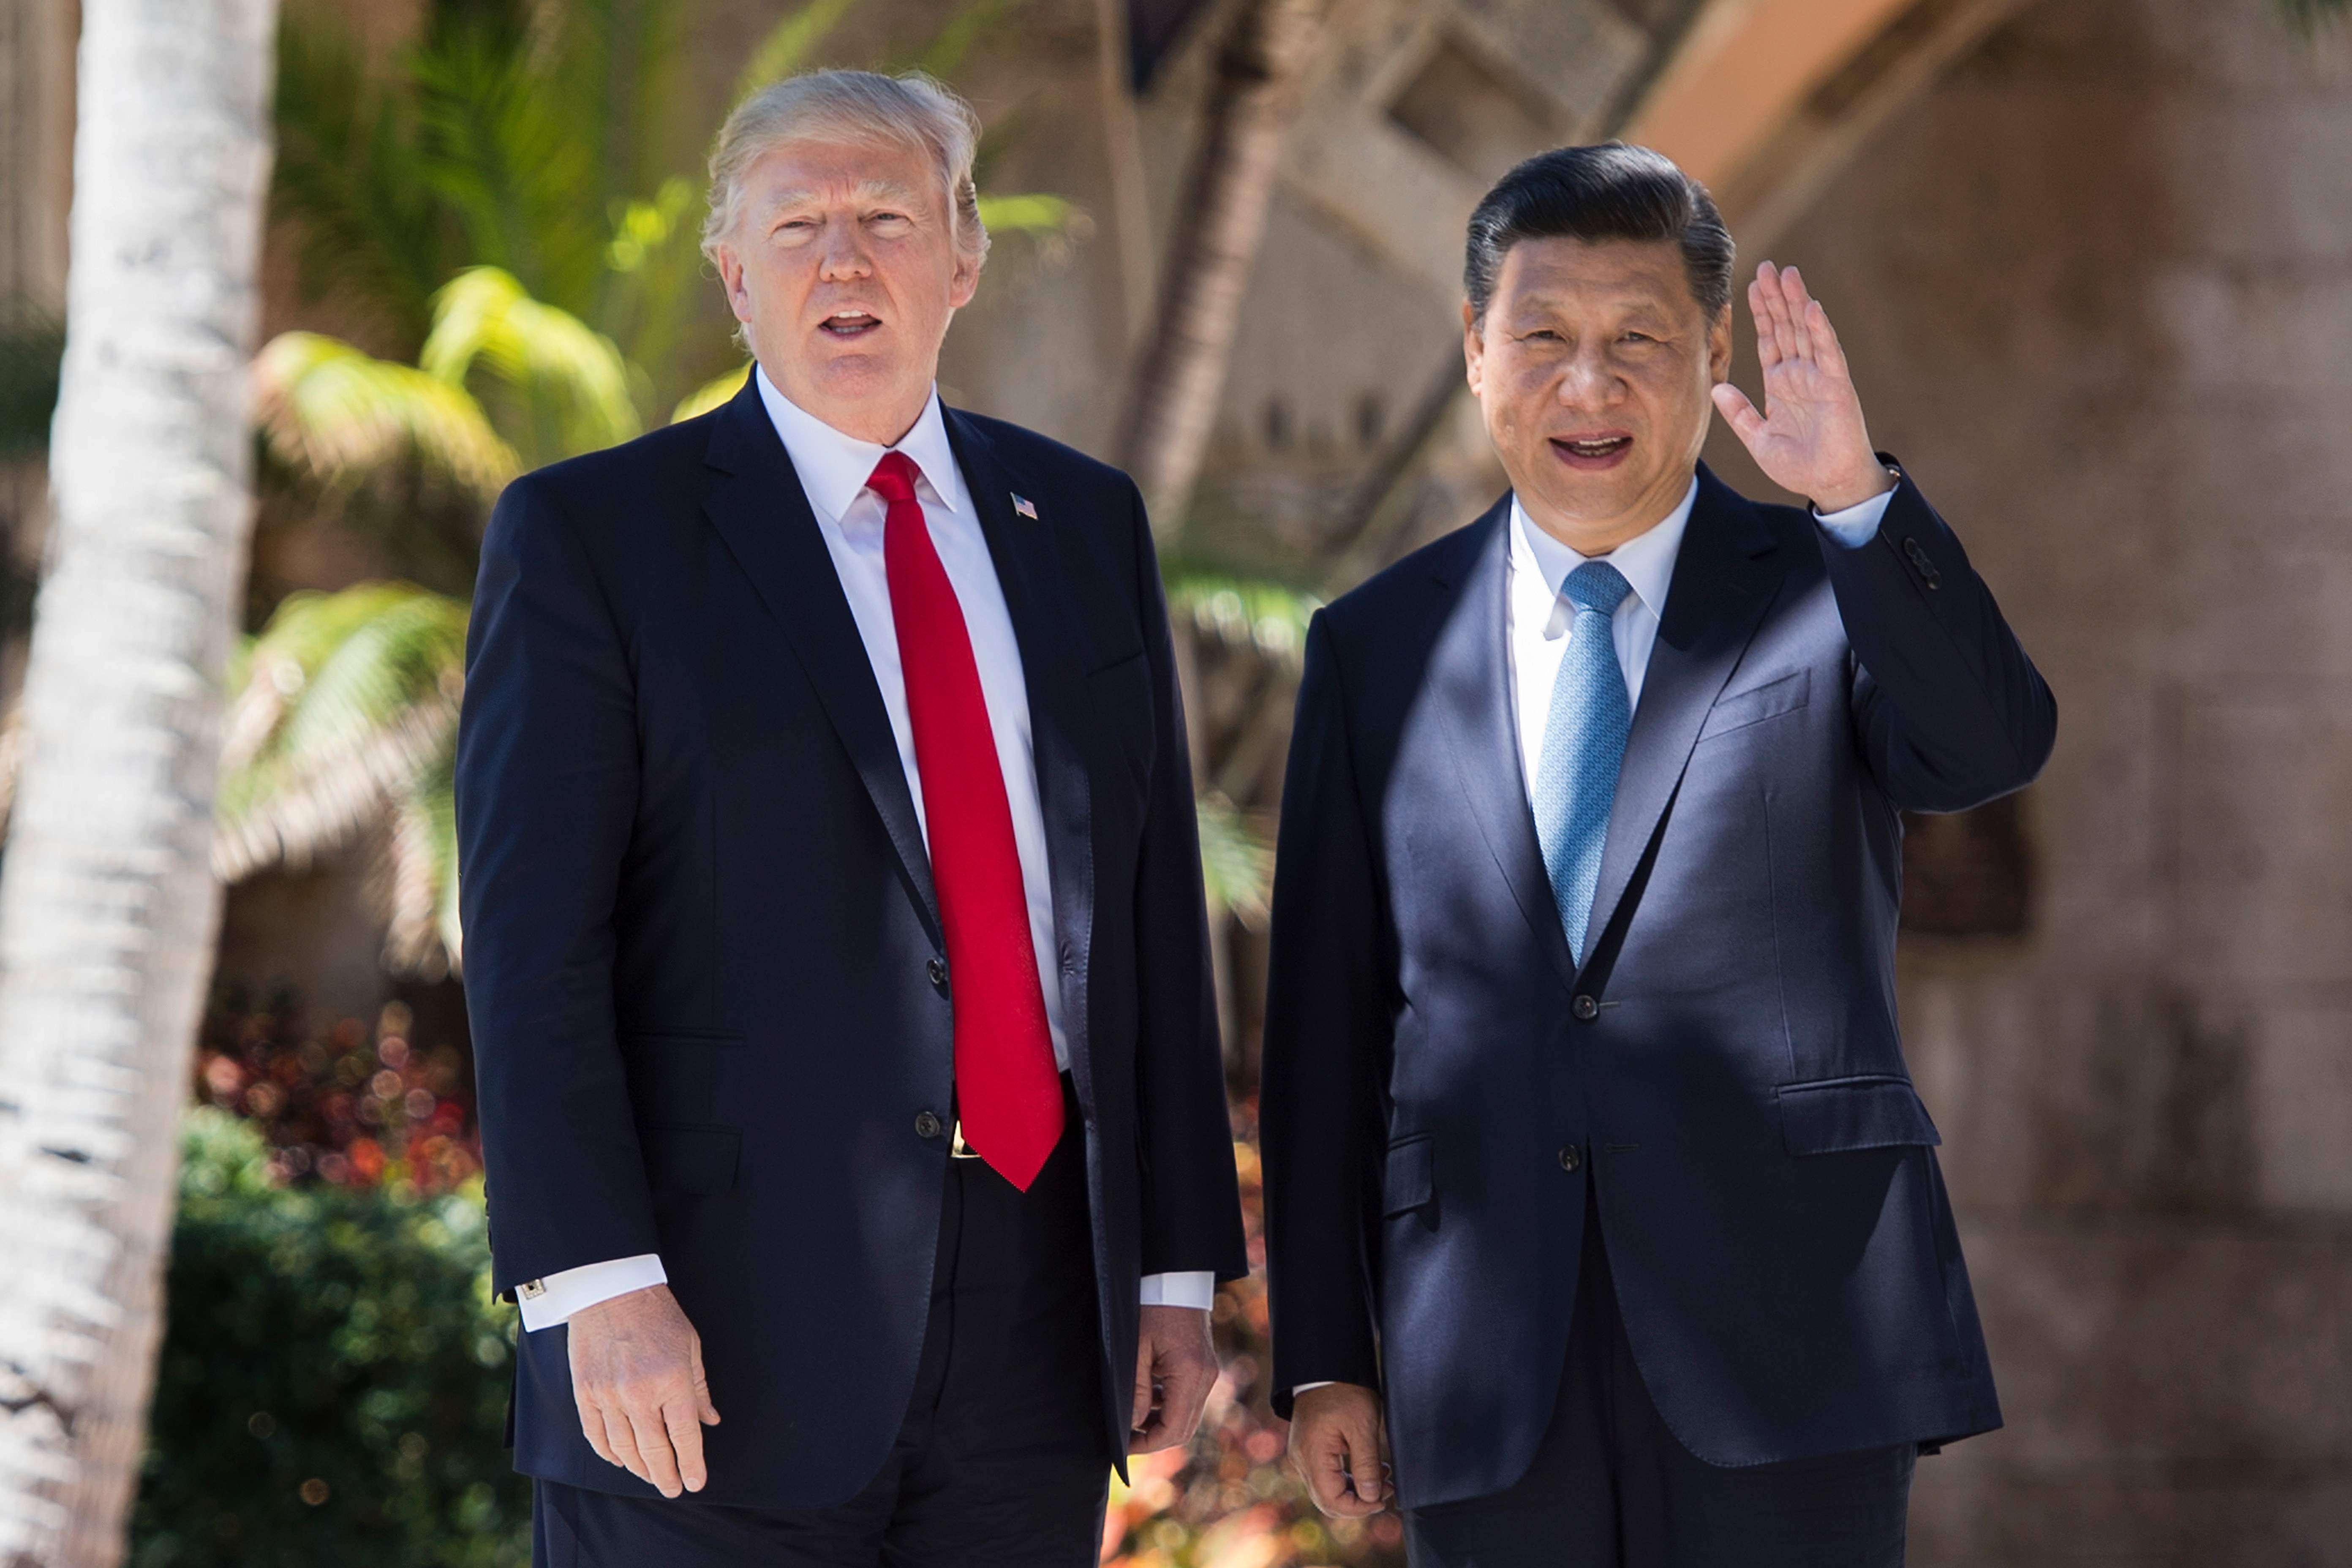 Donald Trump and Xi Jinping at the Mar-a-Lago estate, after a series of meetings in which the US president said “goodwill and friendship was formed”. Photo: AFP